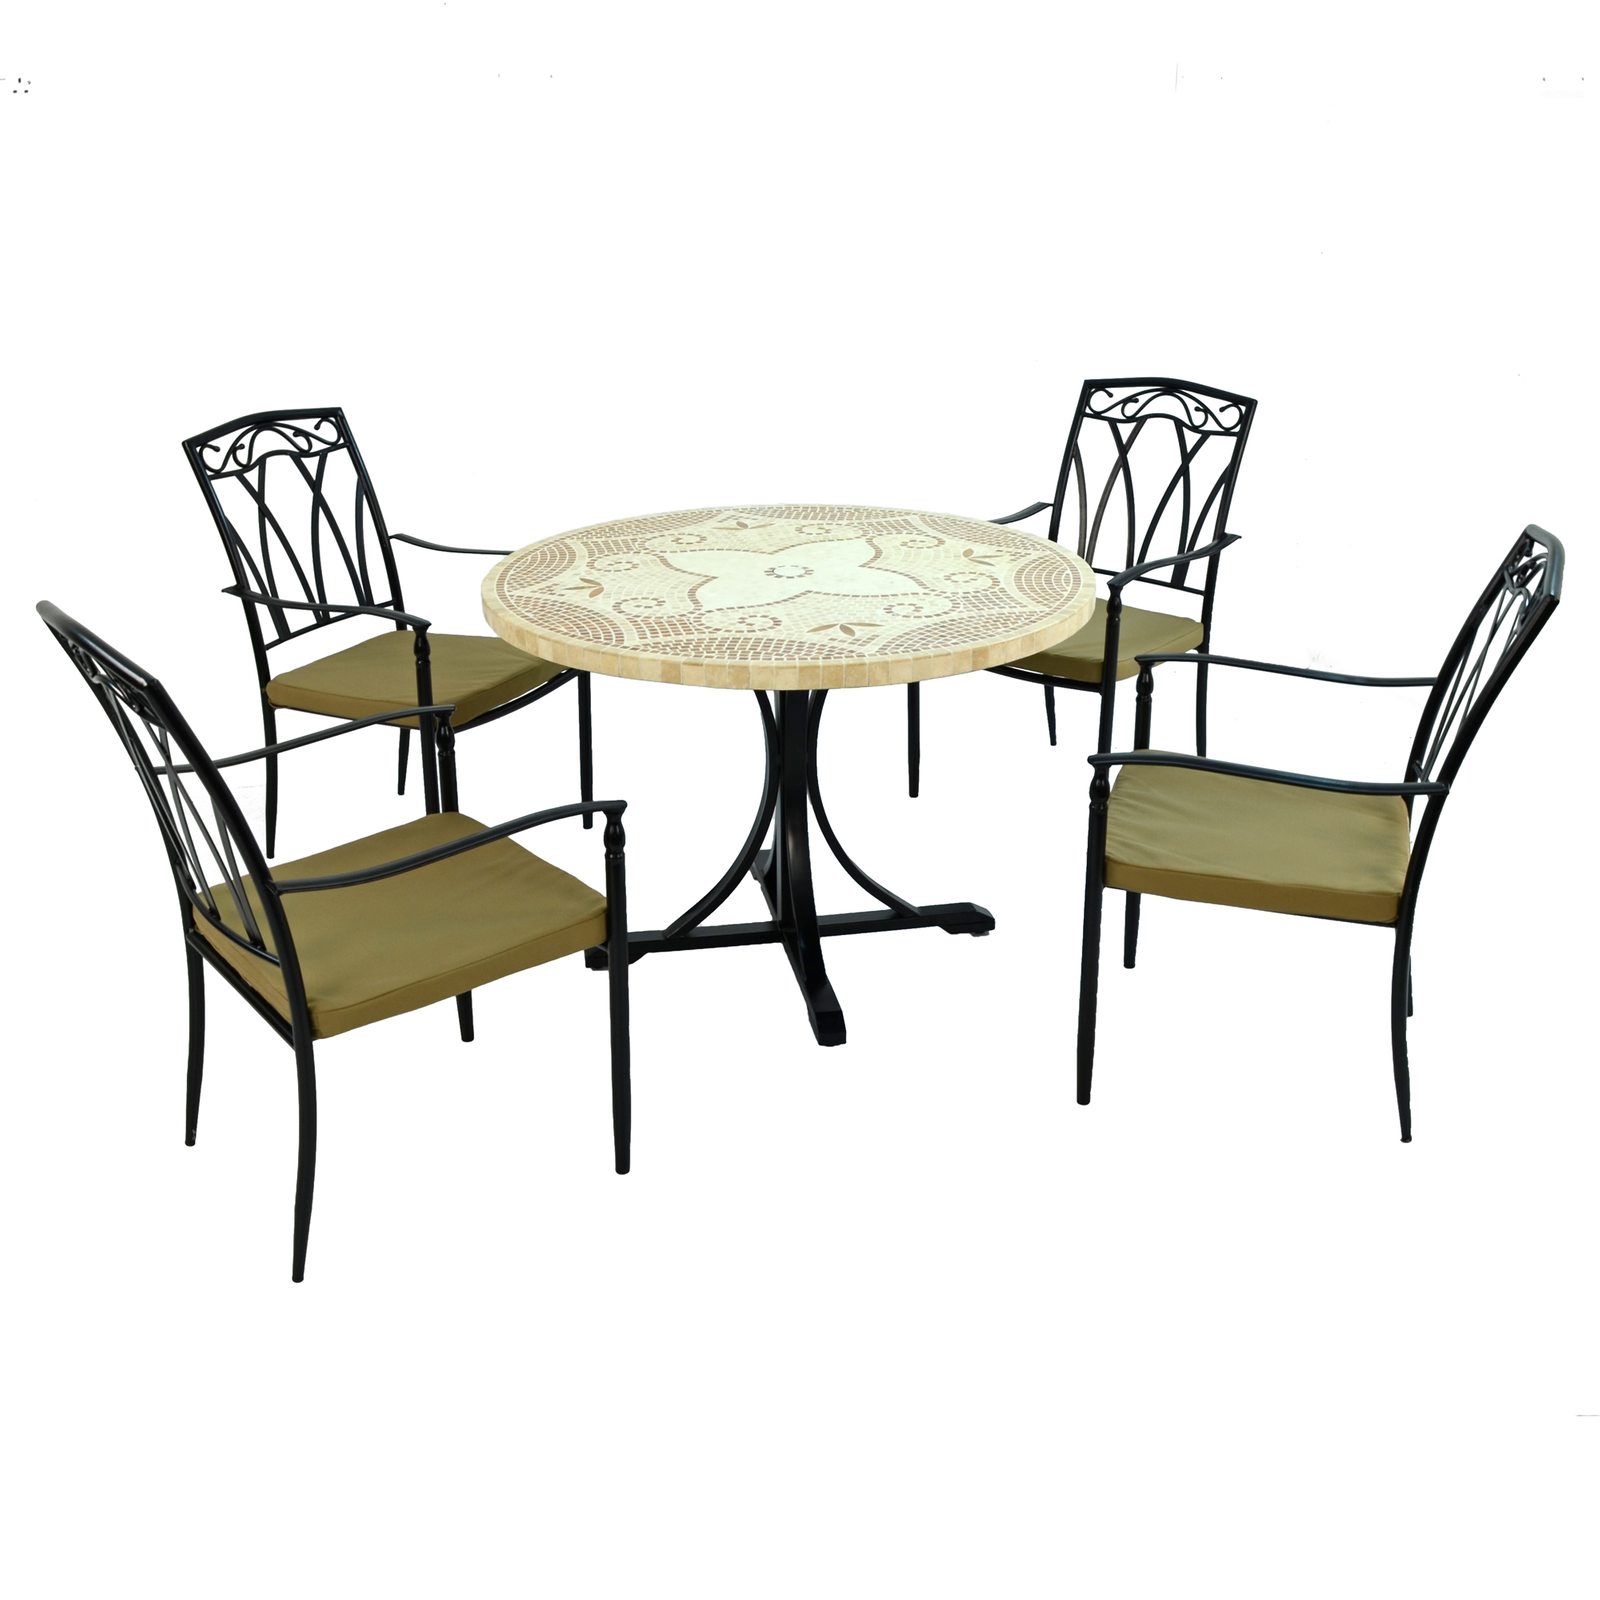 Byron Manor Provence Mosaic Stone Garden Dining Table With 4 Ascot Chairs Set Dining Sets Byron Manor Default Title  